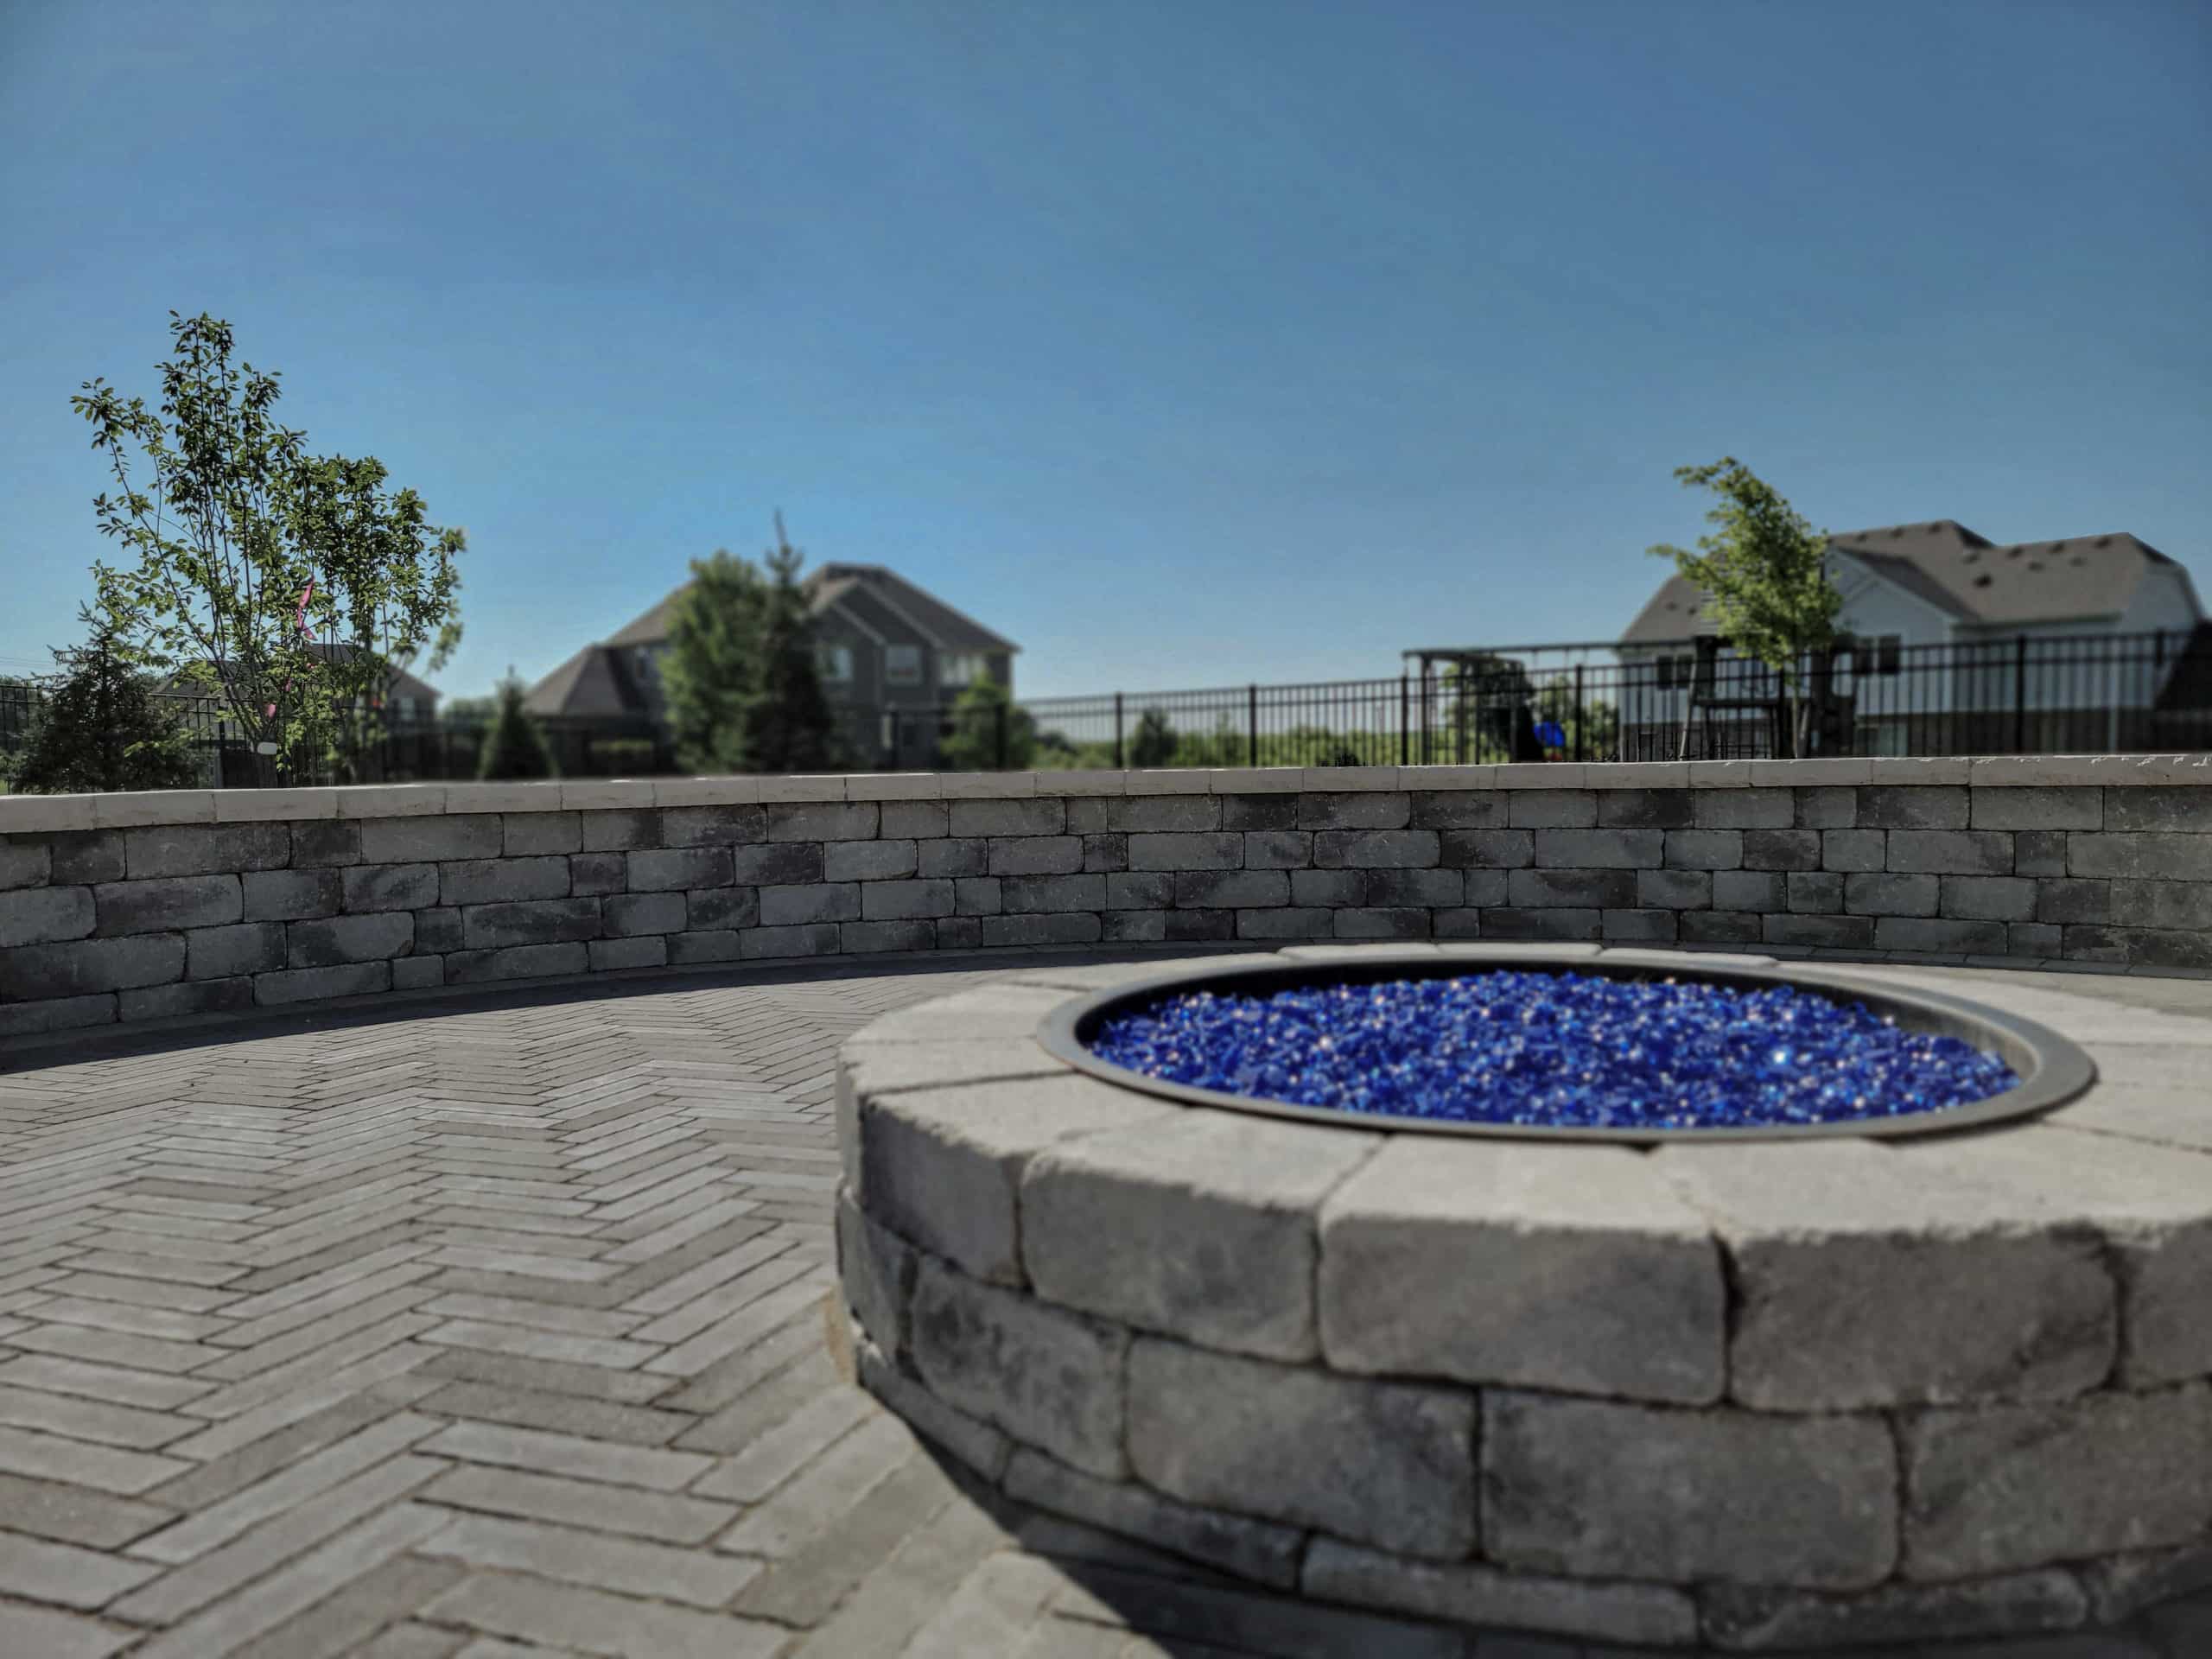 brick fire pit with glass rocks on brick paver patio with brick retaining wall surrounding. Hardscaping services by bret-mar